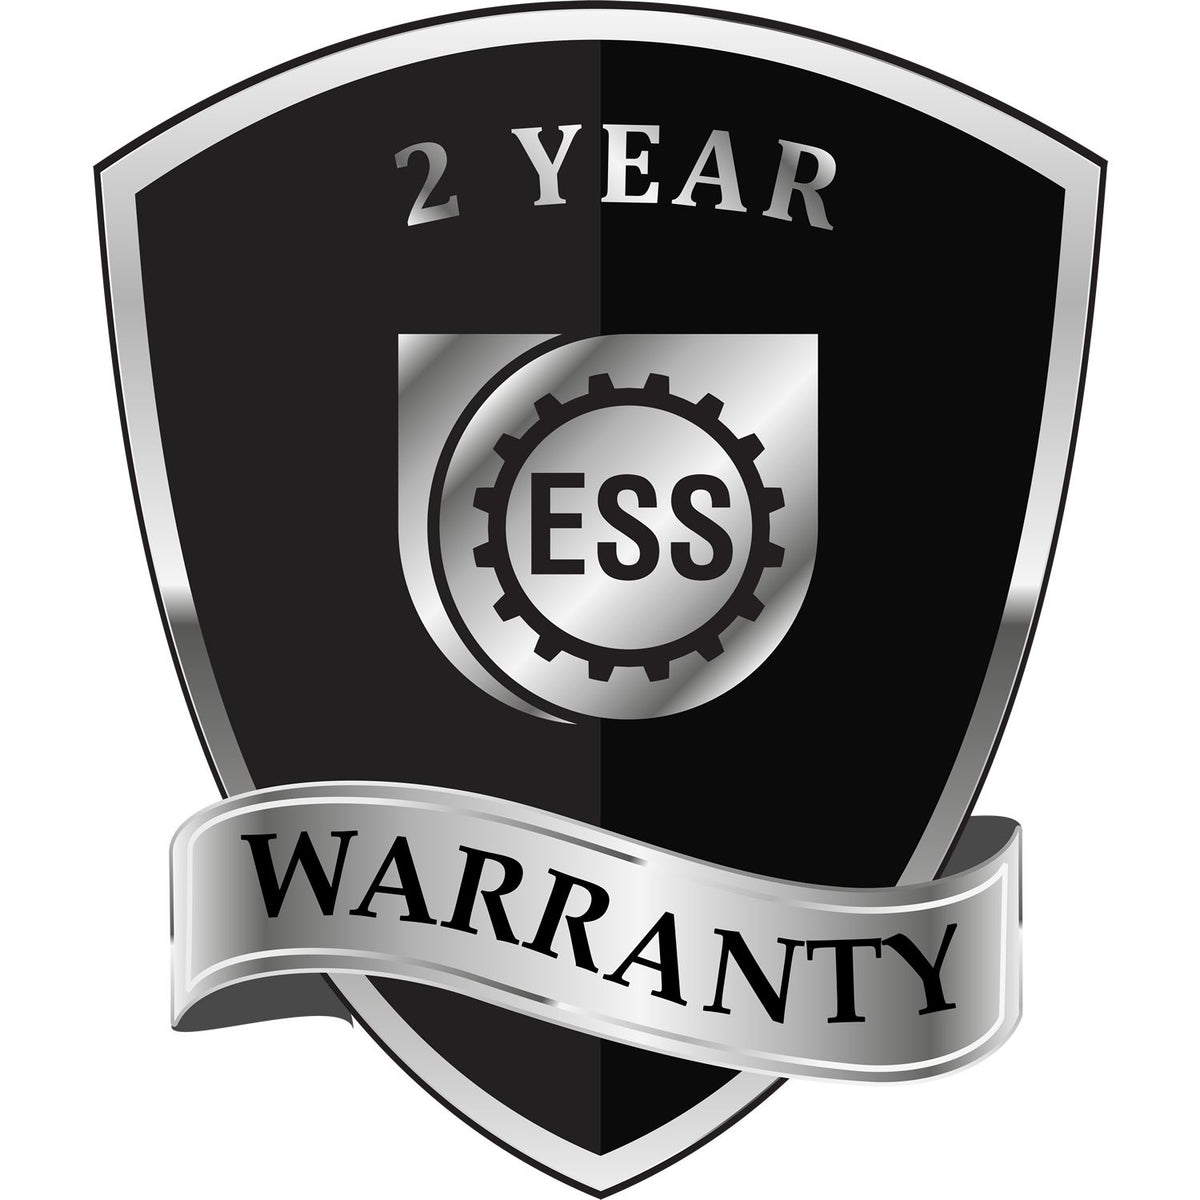 A badge or emblem showing a warranty icon for the Heavy Duty Cast Iron Nevada Engineer Seal Embosser